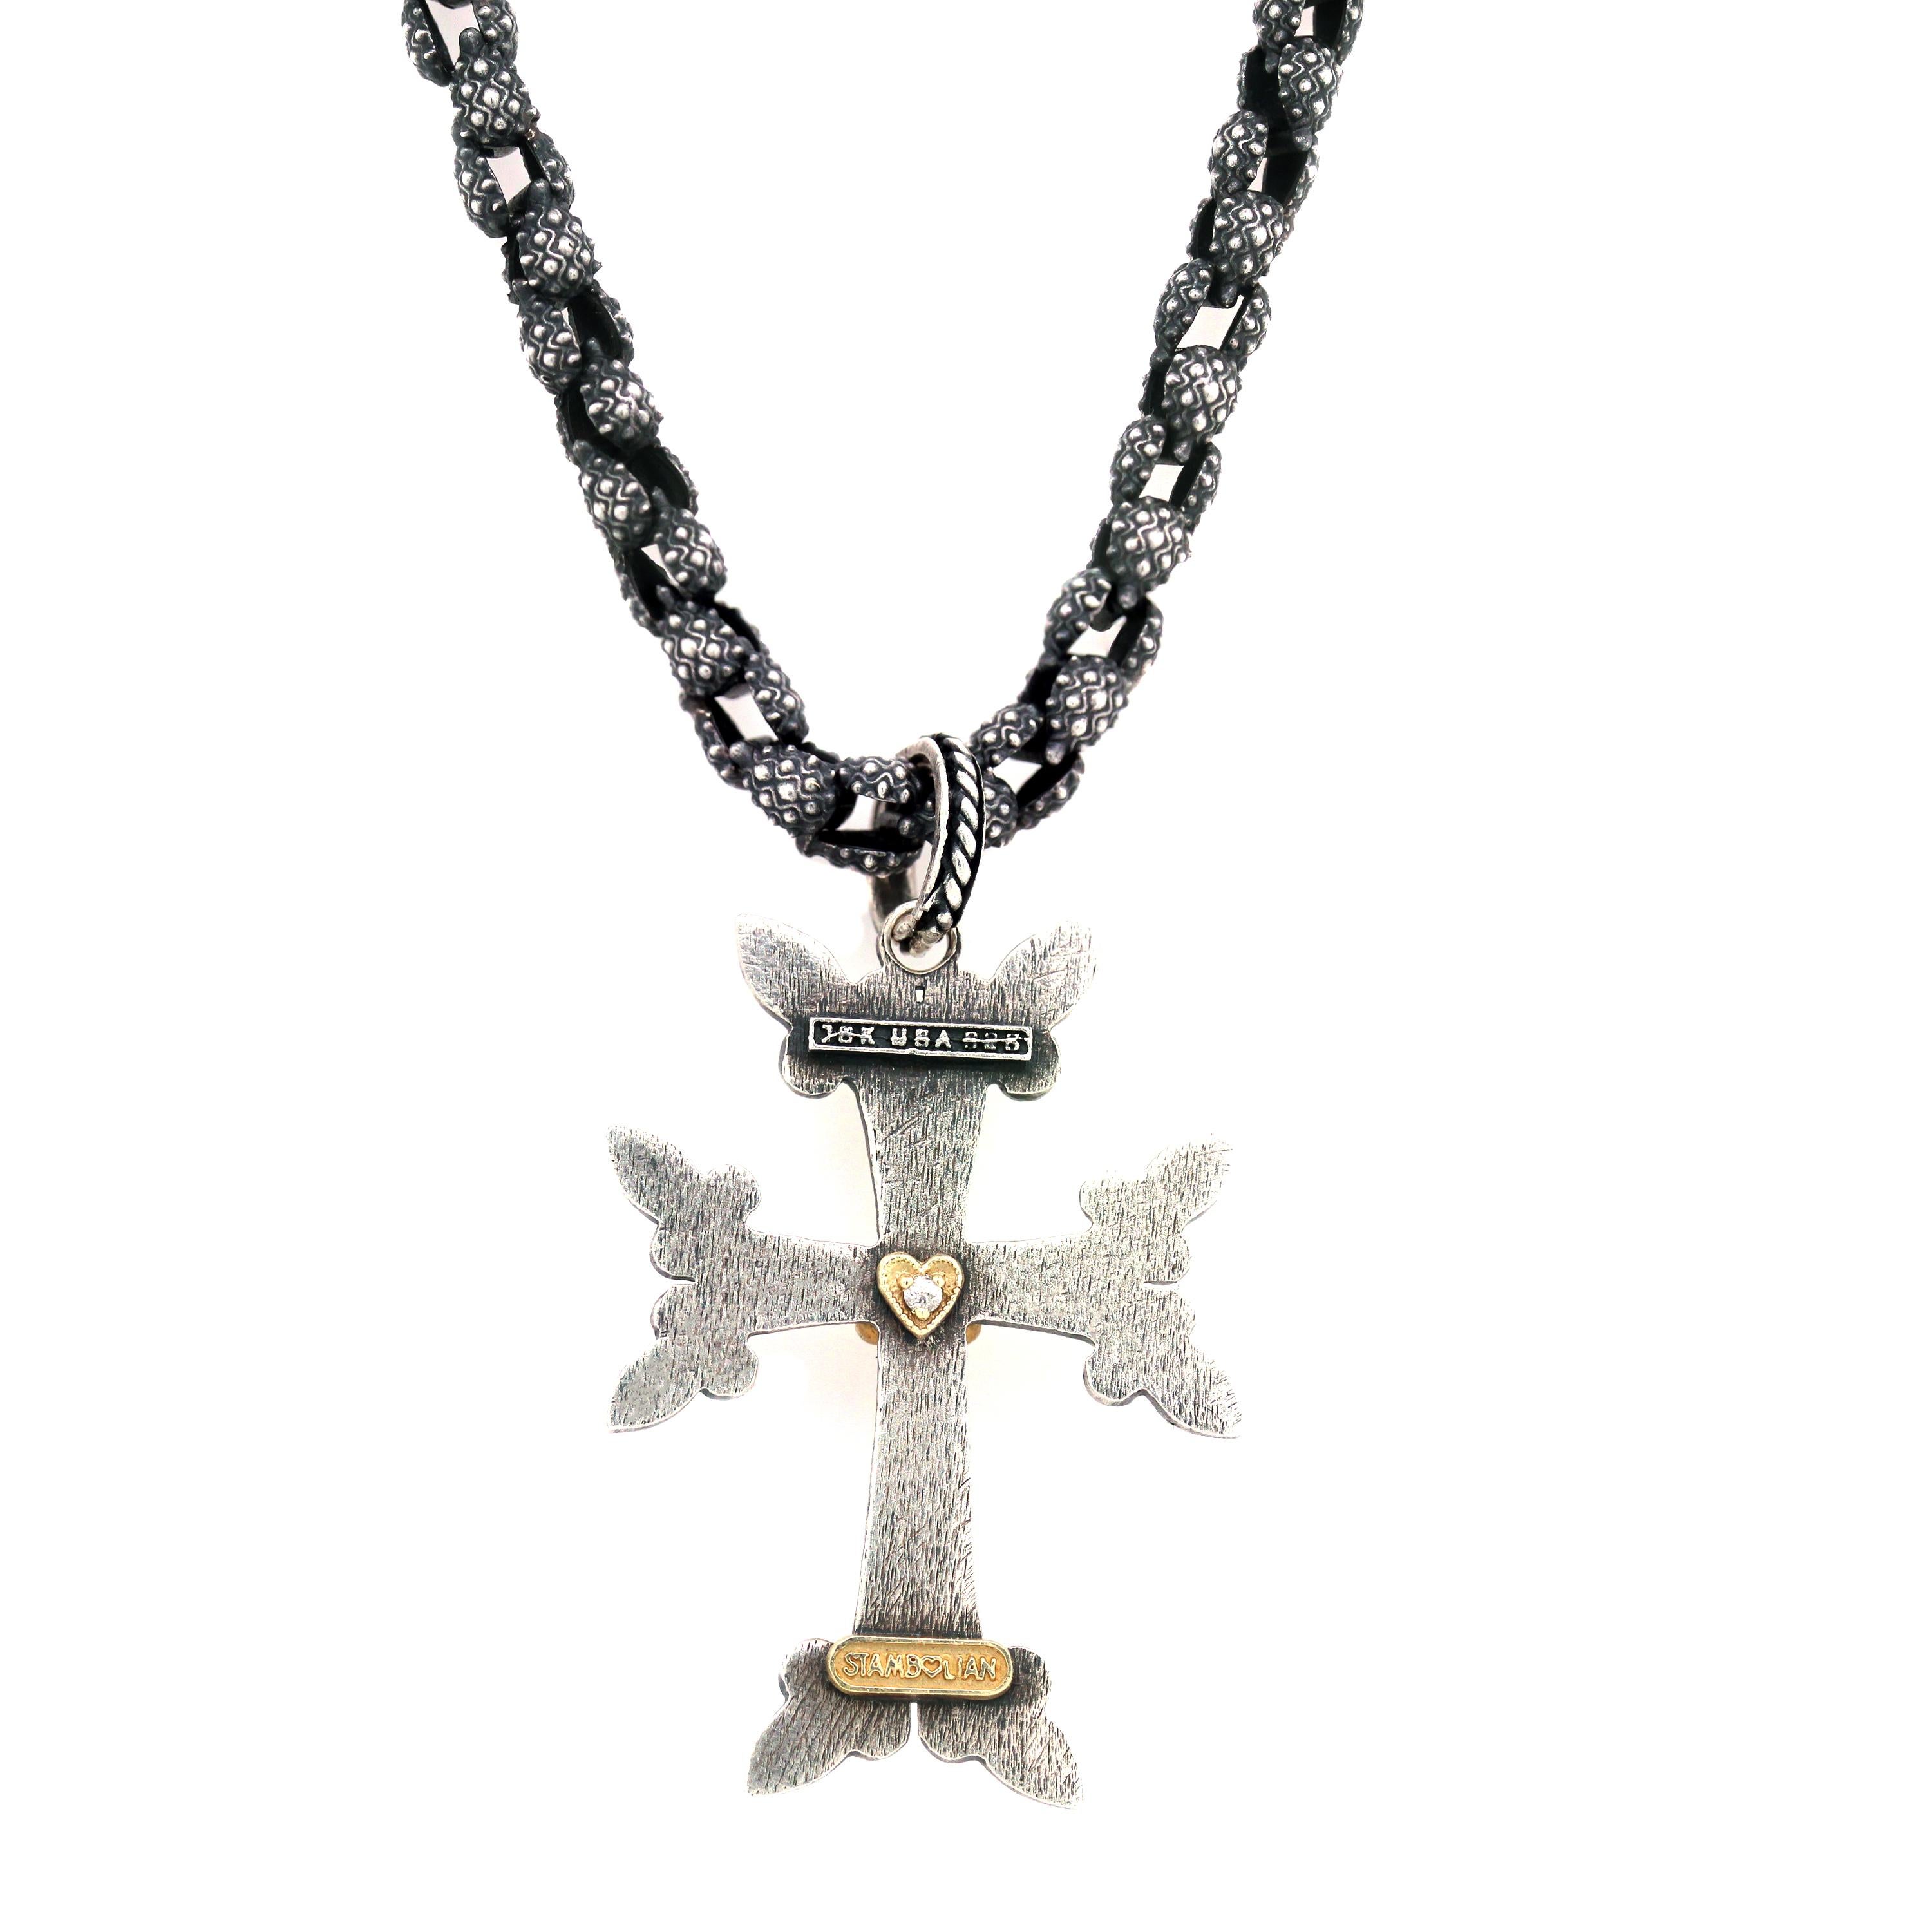 Aged Sterling Silver and 18K Gold Cross Pendant with Hand Made Chain by Stambolian

This unique cross by Stambolian illustrates the true beauty in simplicity. The cross is crafted in sterling silver with a solid 18K gold center with one single